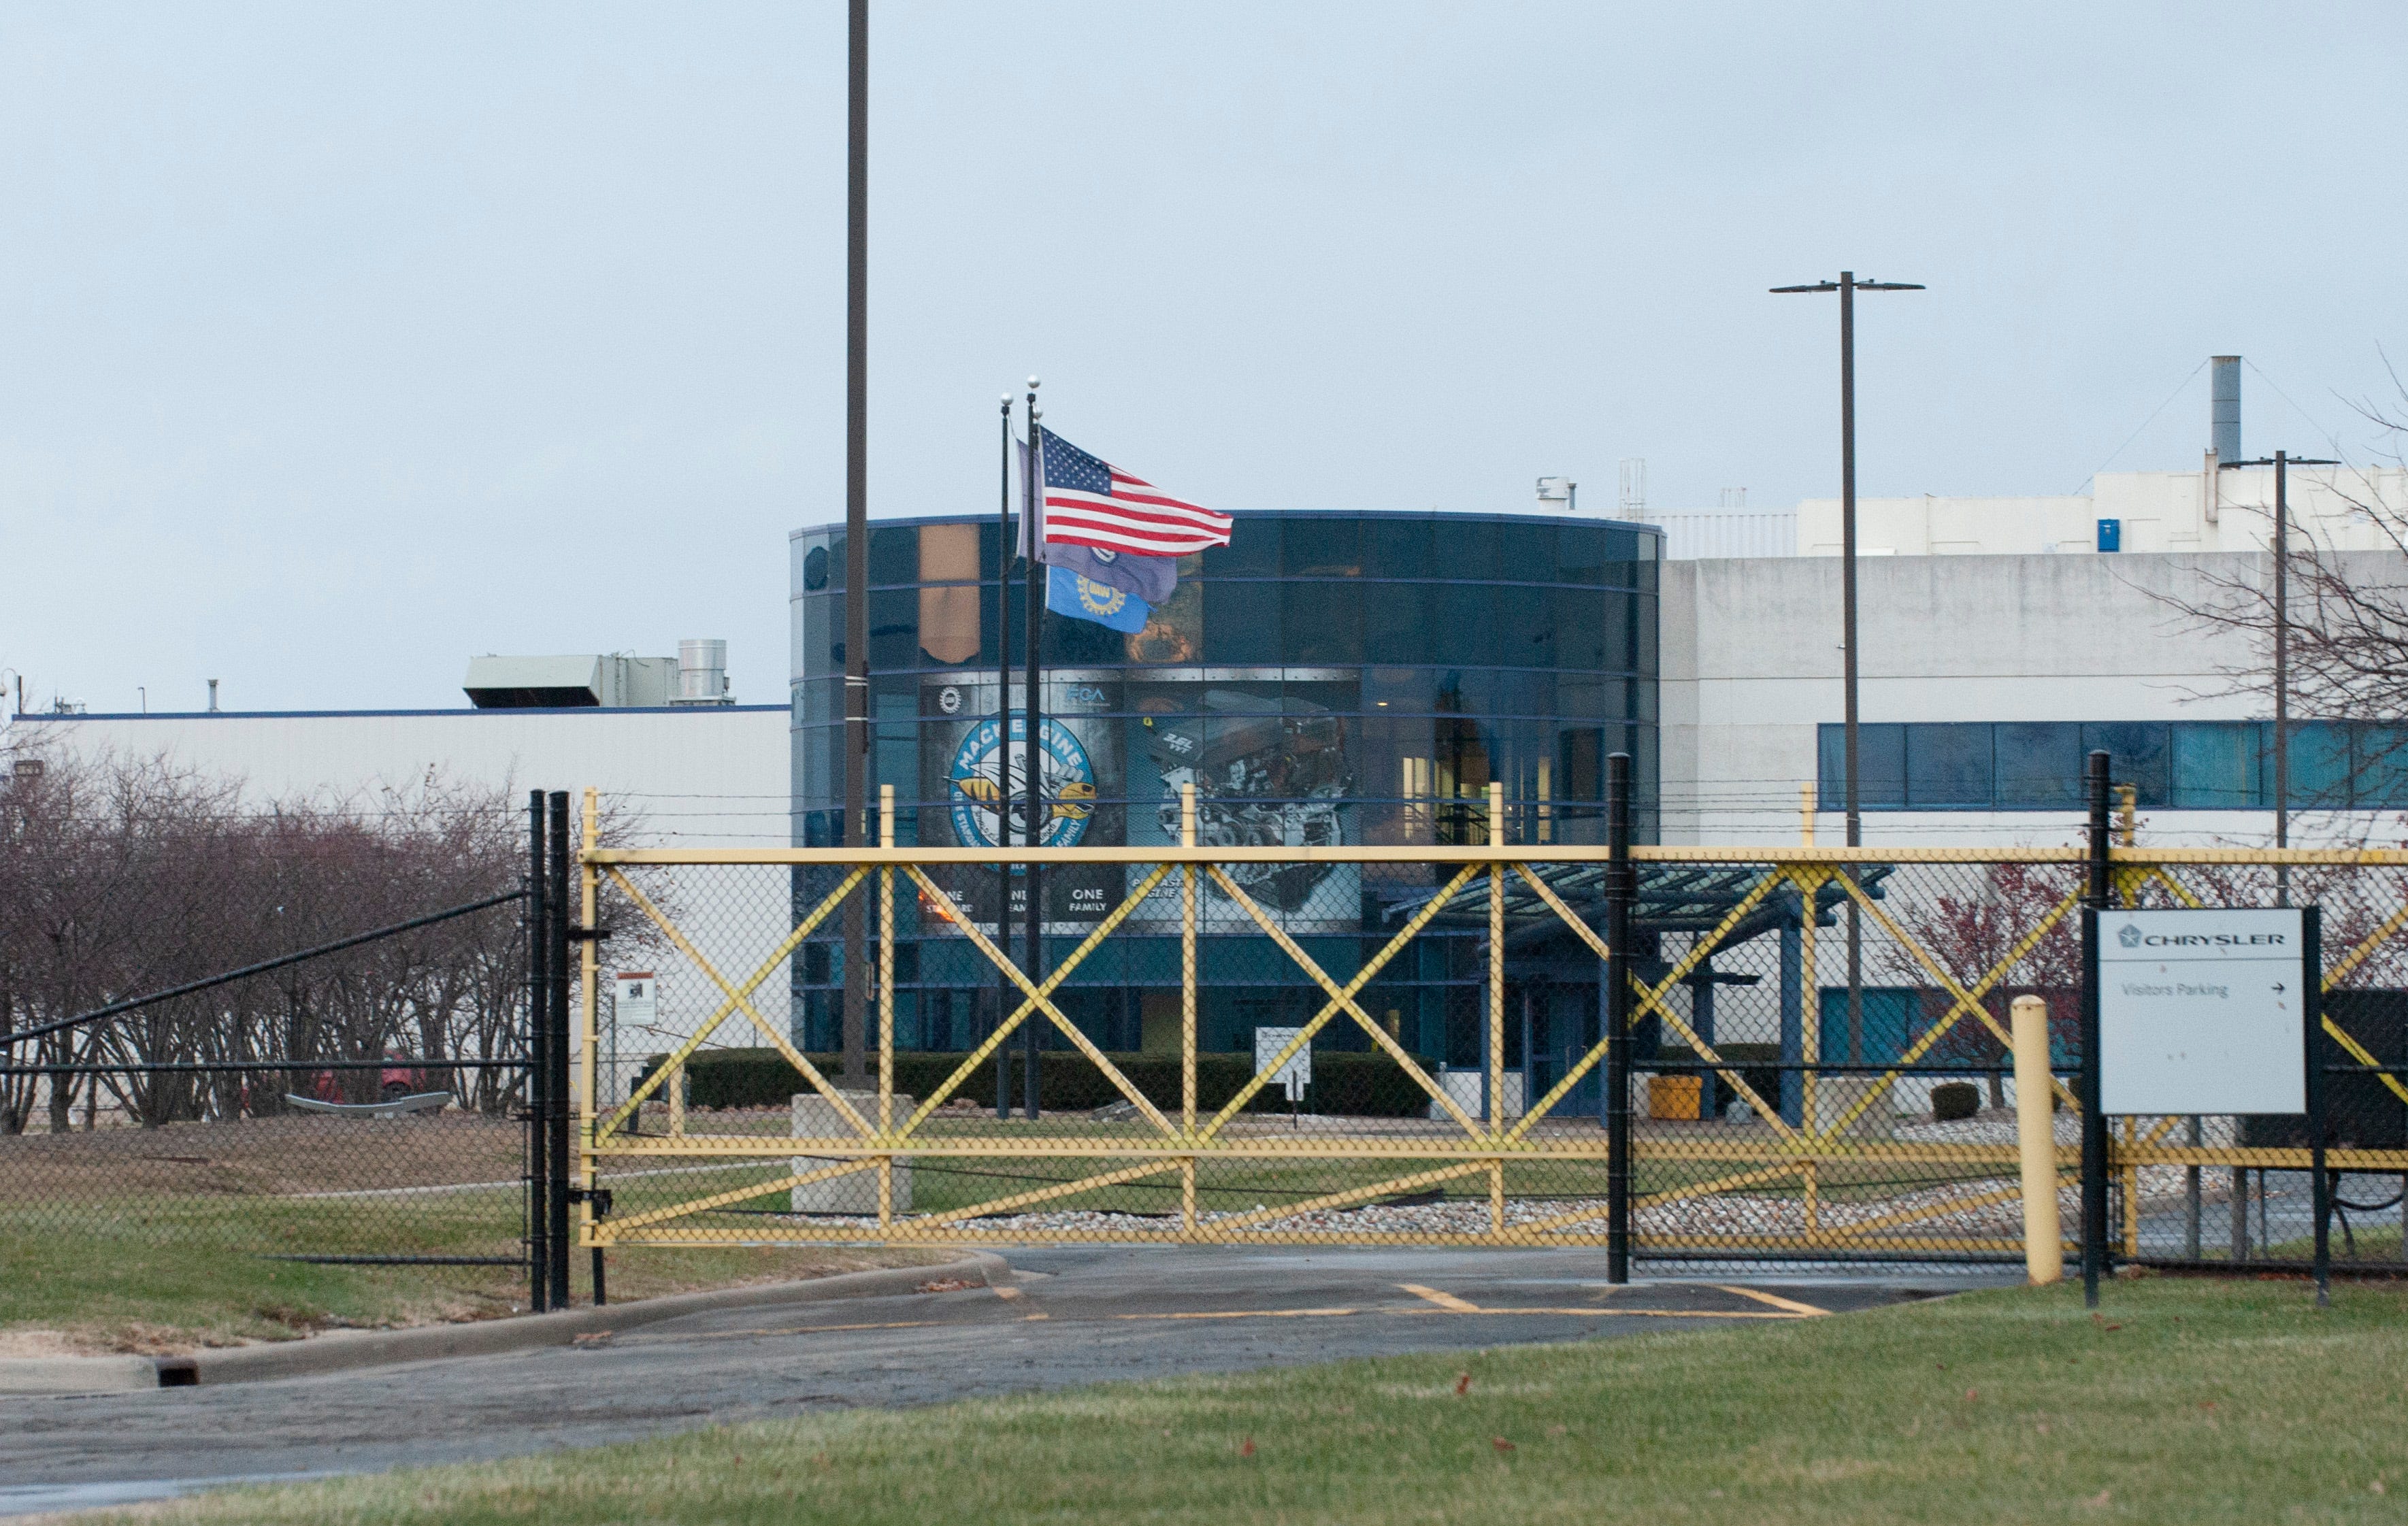 The entrance to Fiat Chrysler Automobiles' Mack Avenue Engine plant in Detroit is seen on Thursday.  FCA plans to convert the idle Mack Avenue Engine II, idle since 2012, as an assembly plant to build a new three-row Jeep Grand Cherokee for the model year 2021.